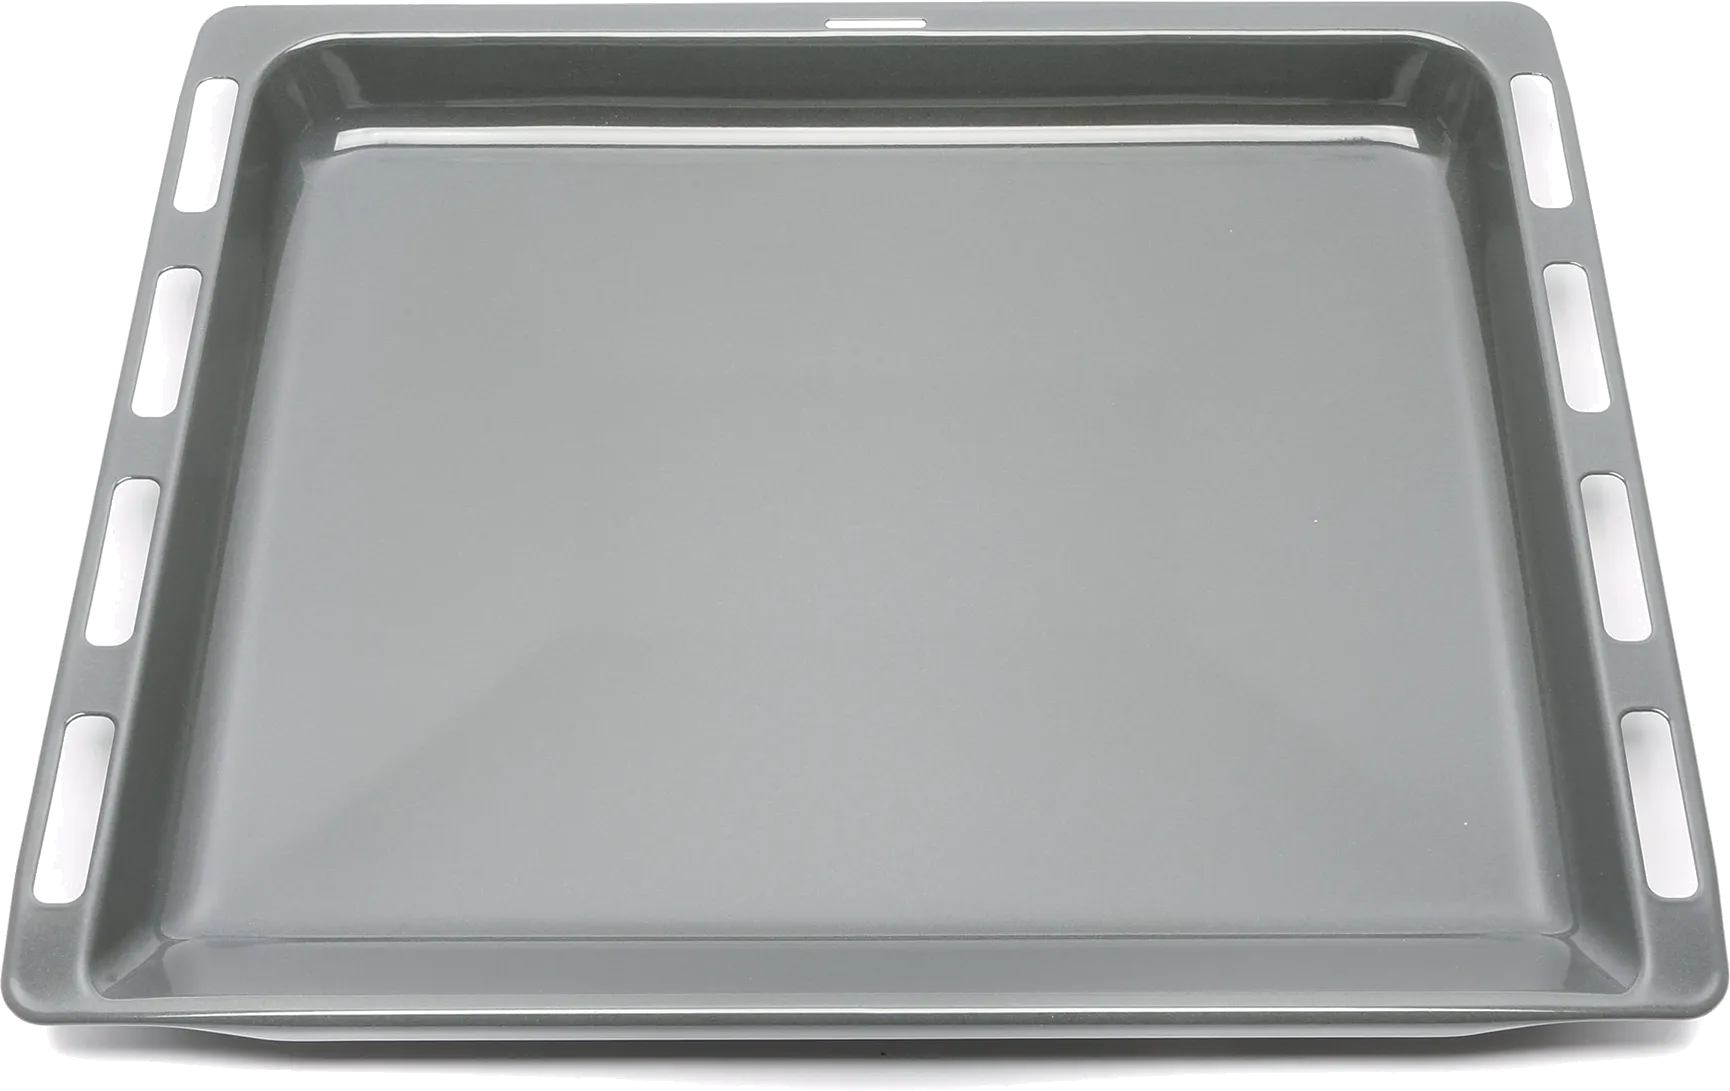 grey 465 x 375 x 37 mm Baking tray for ovens 